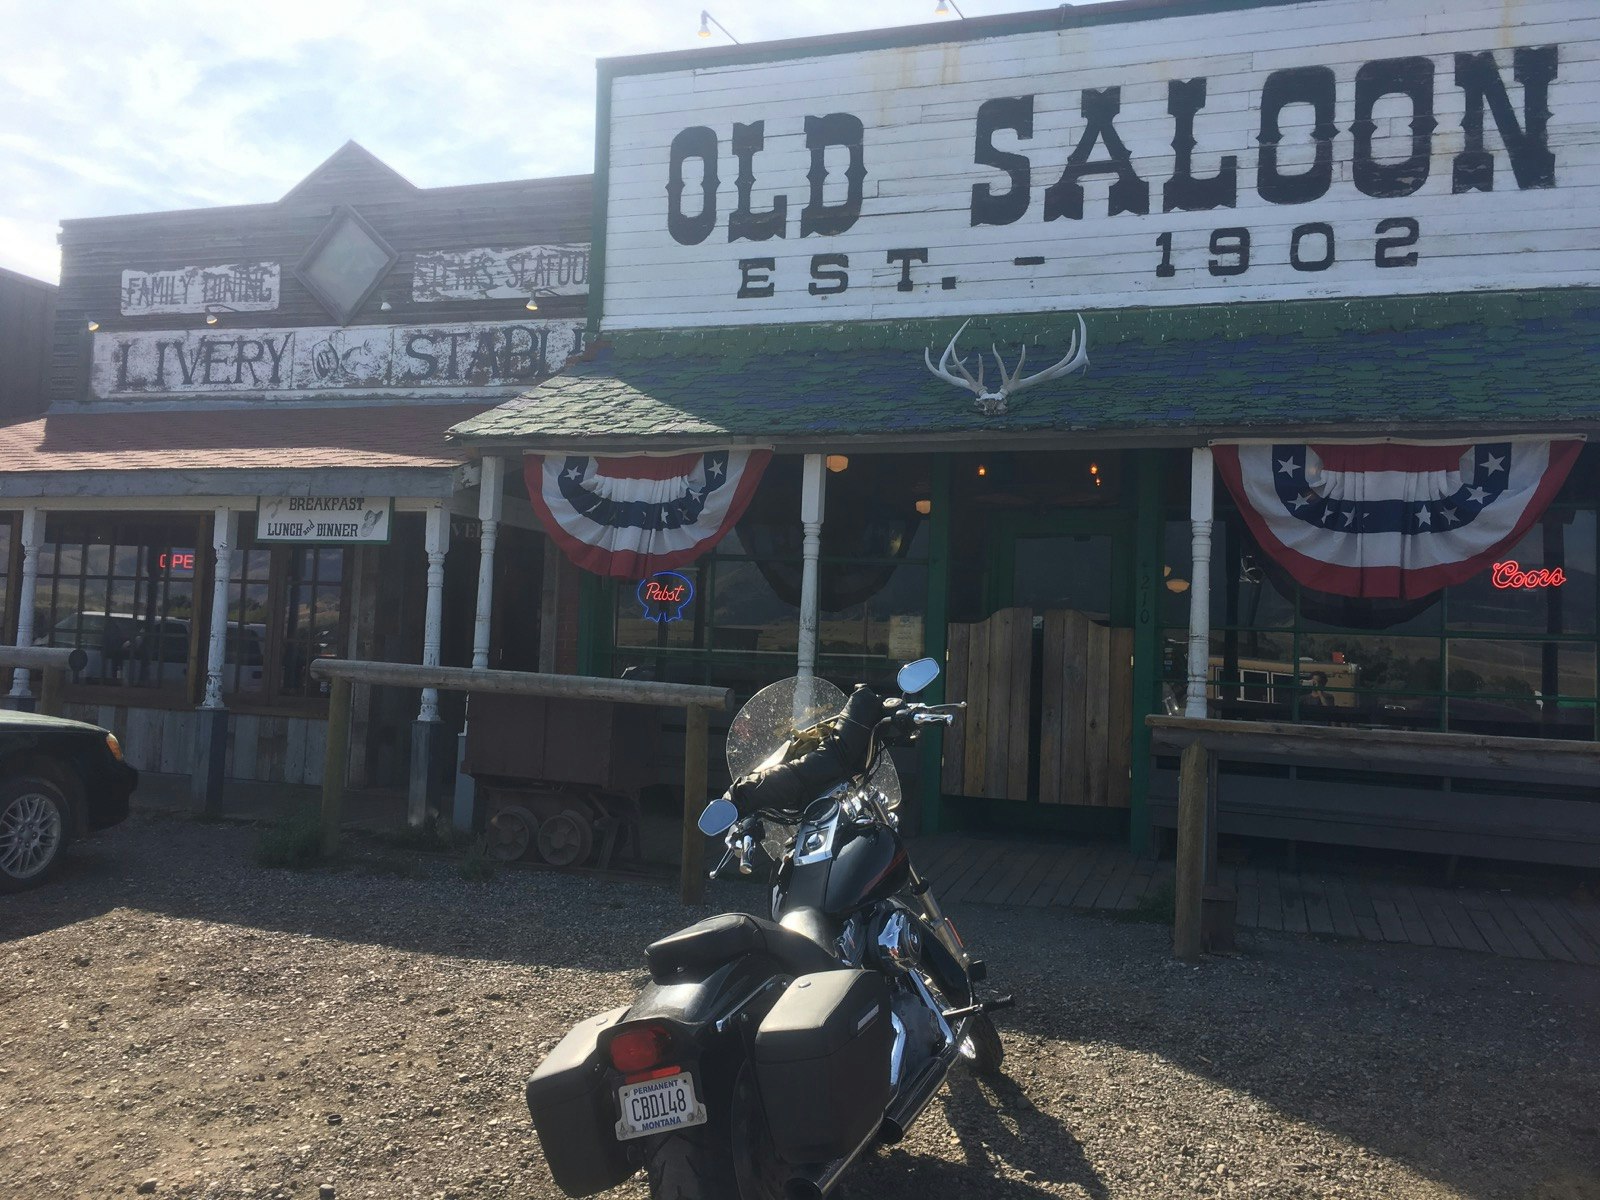 A motorcycle is parked in front of an old-time saloon, complete with bunting and a sign that says it was established in 1902 © Jay Gentile / Lonely Planet